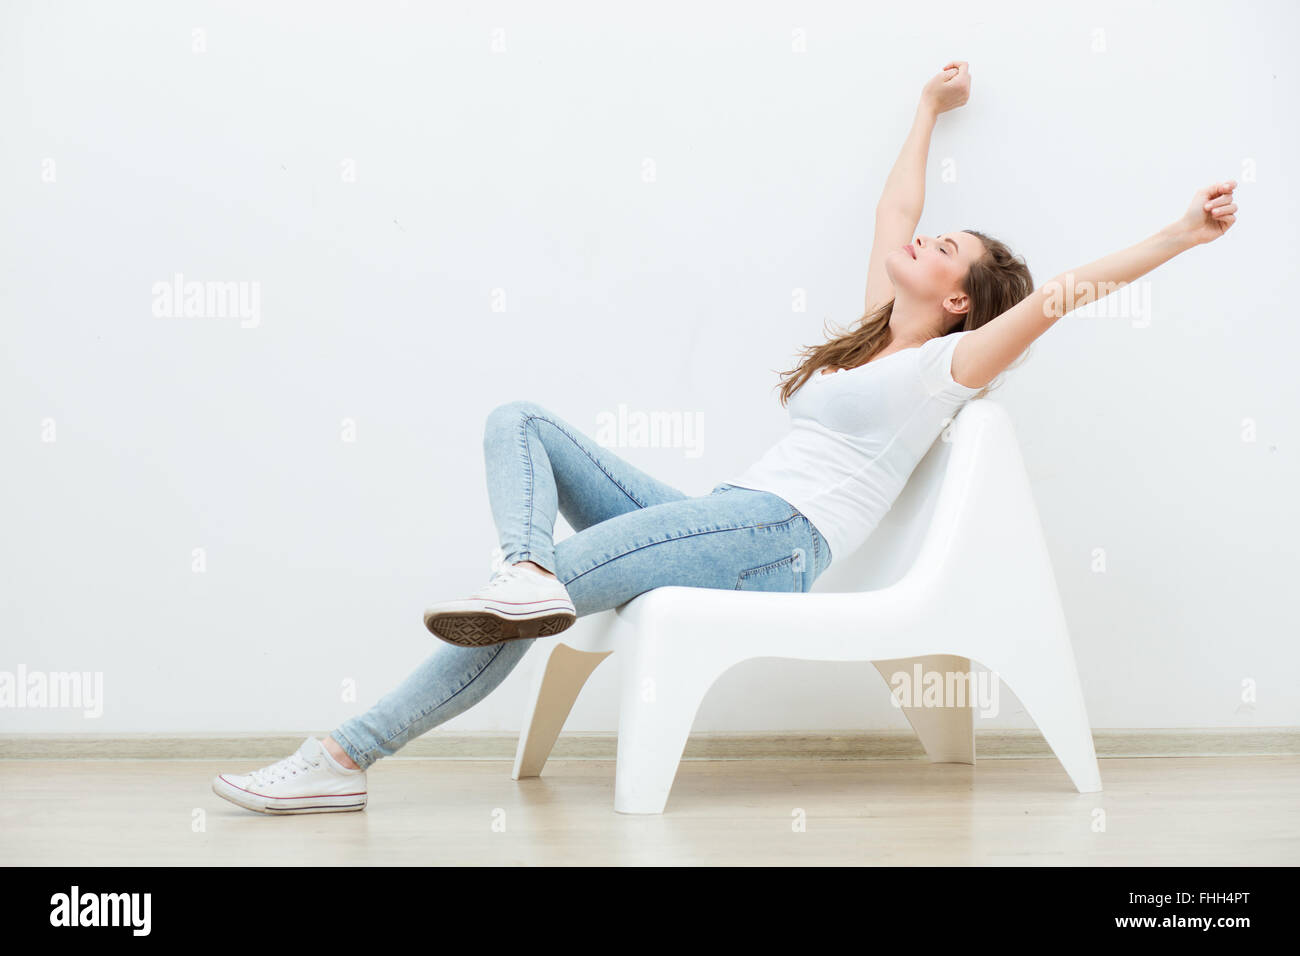 single happy young woman sitting on a white chair in an empty room, thinking on something Stock Photo